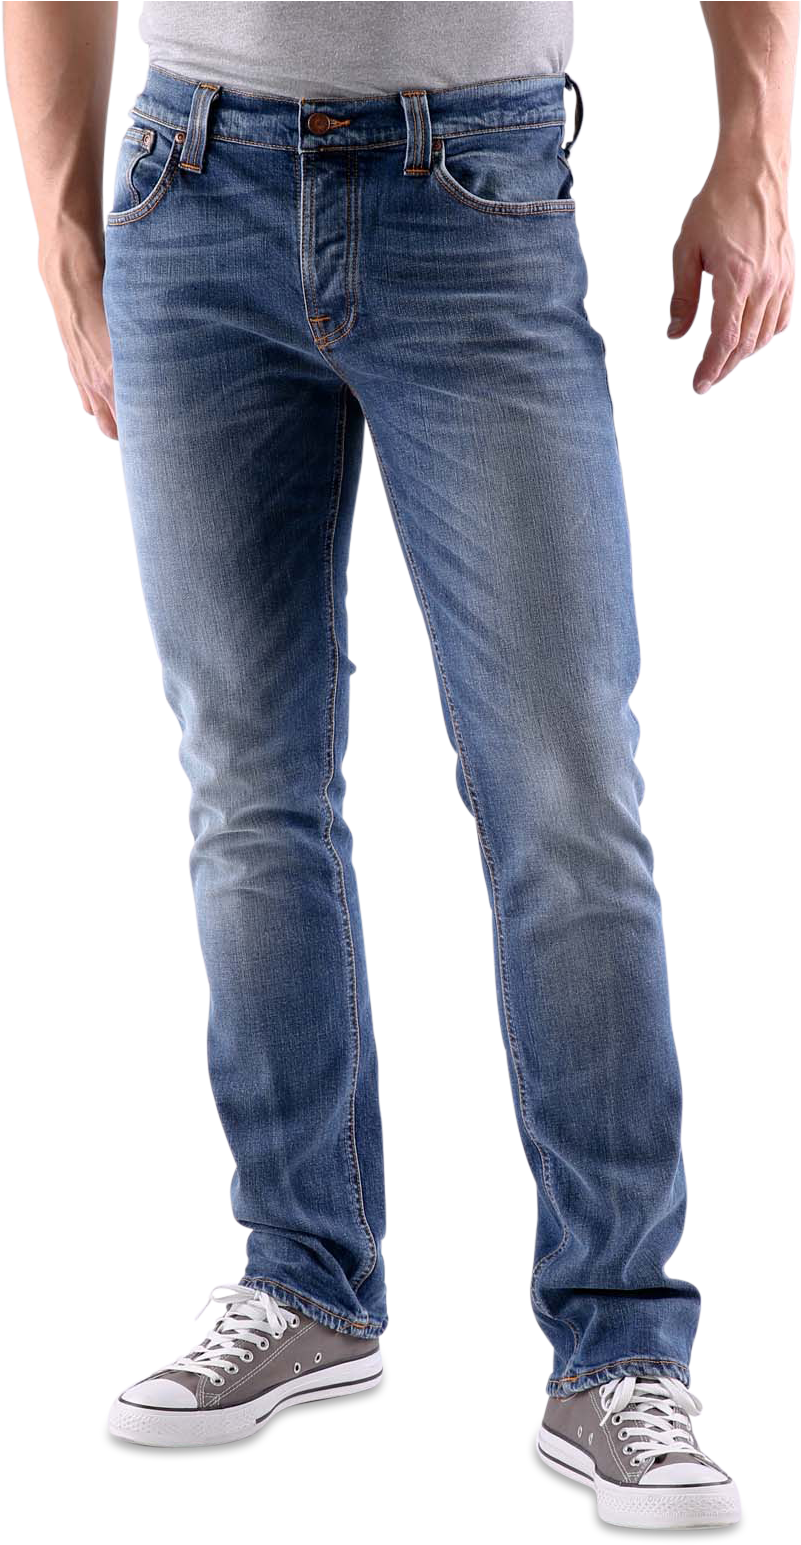 Jeans PNG Photos - PNG Play